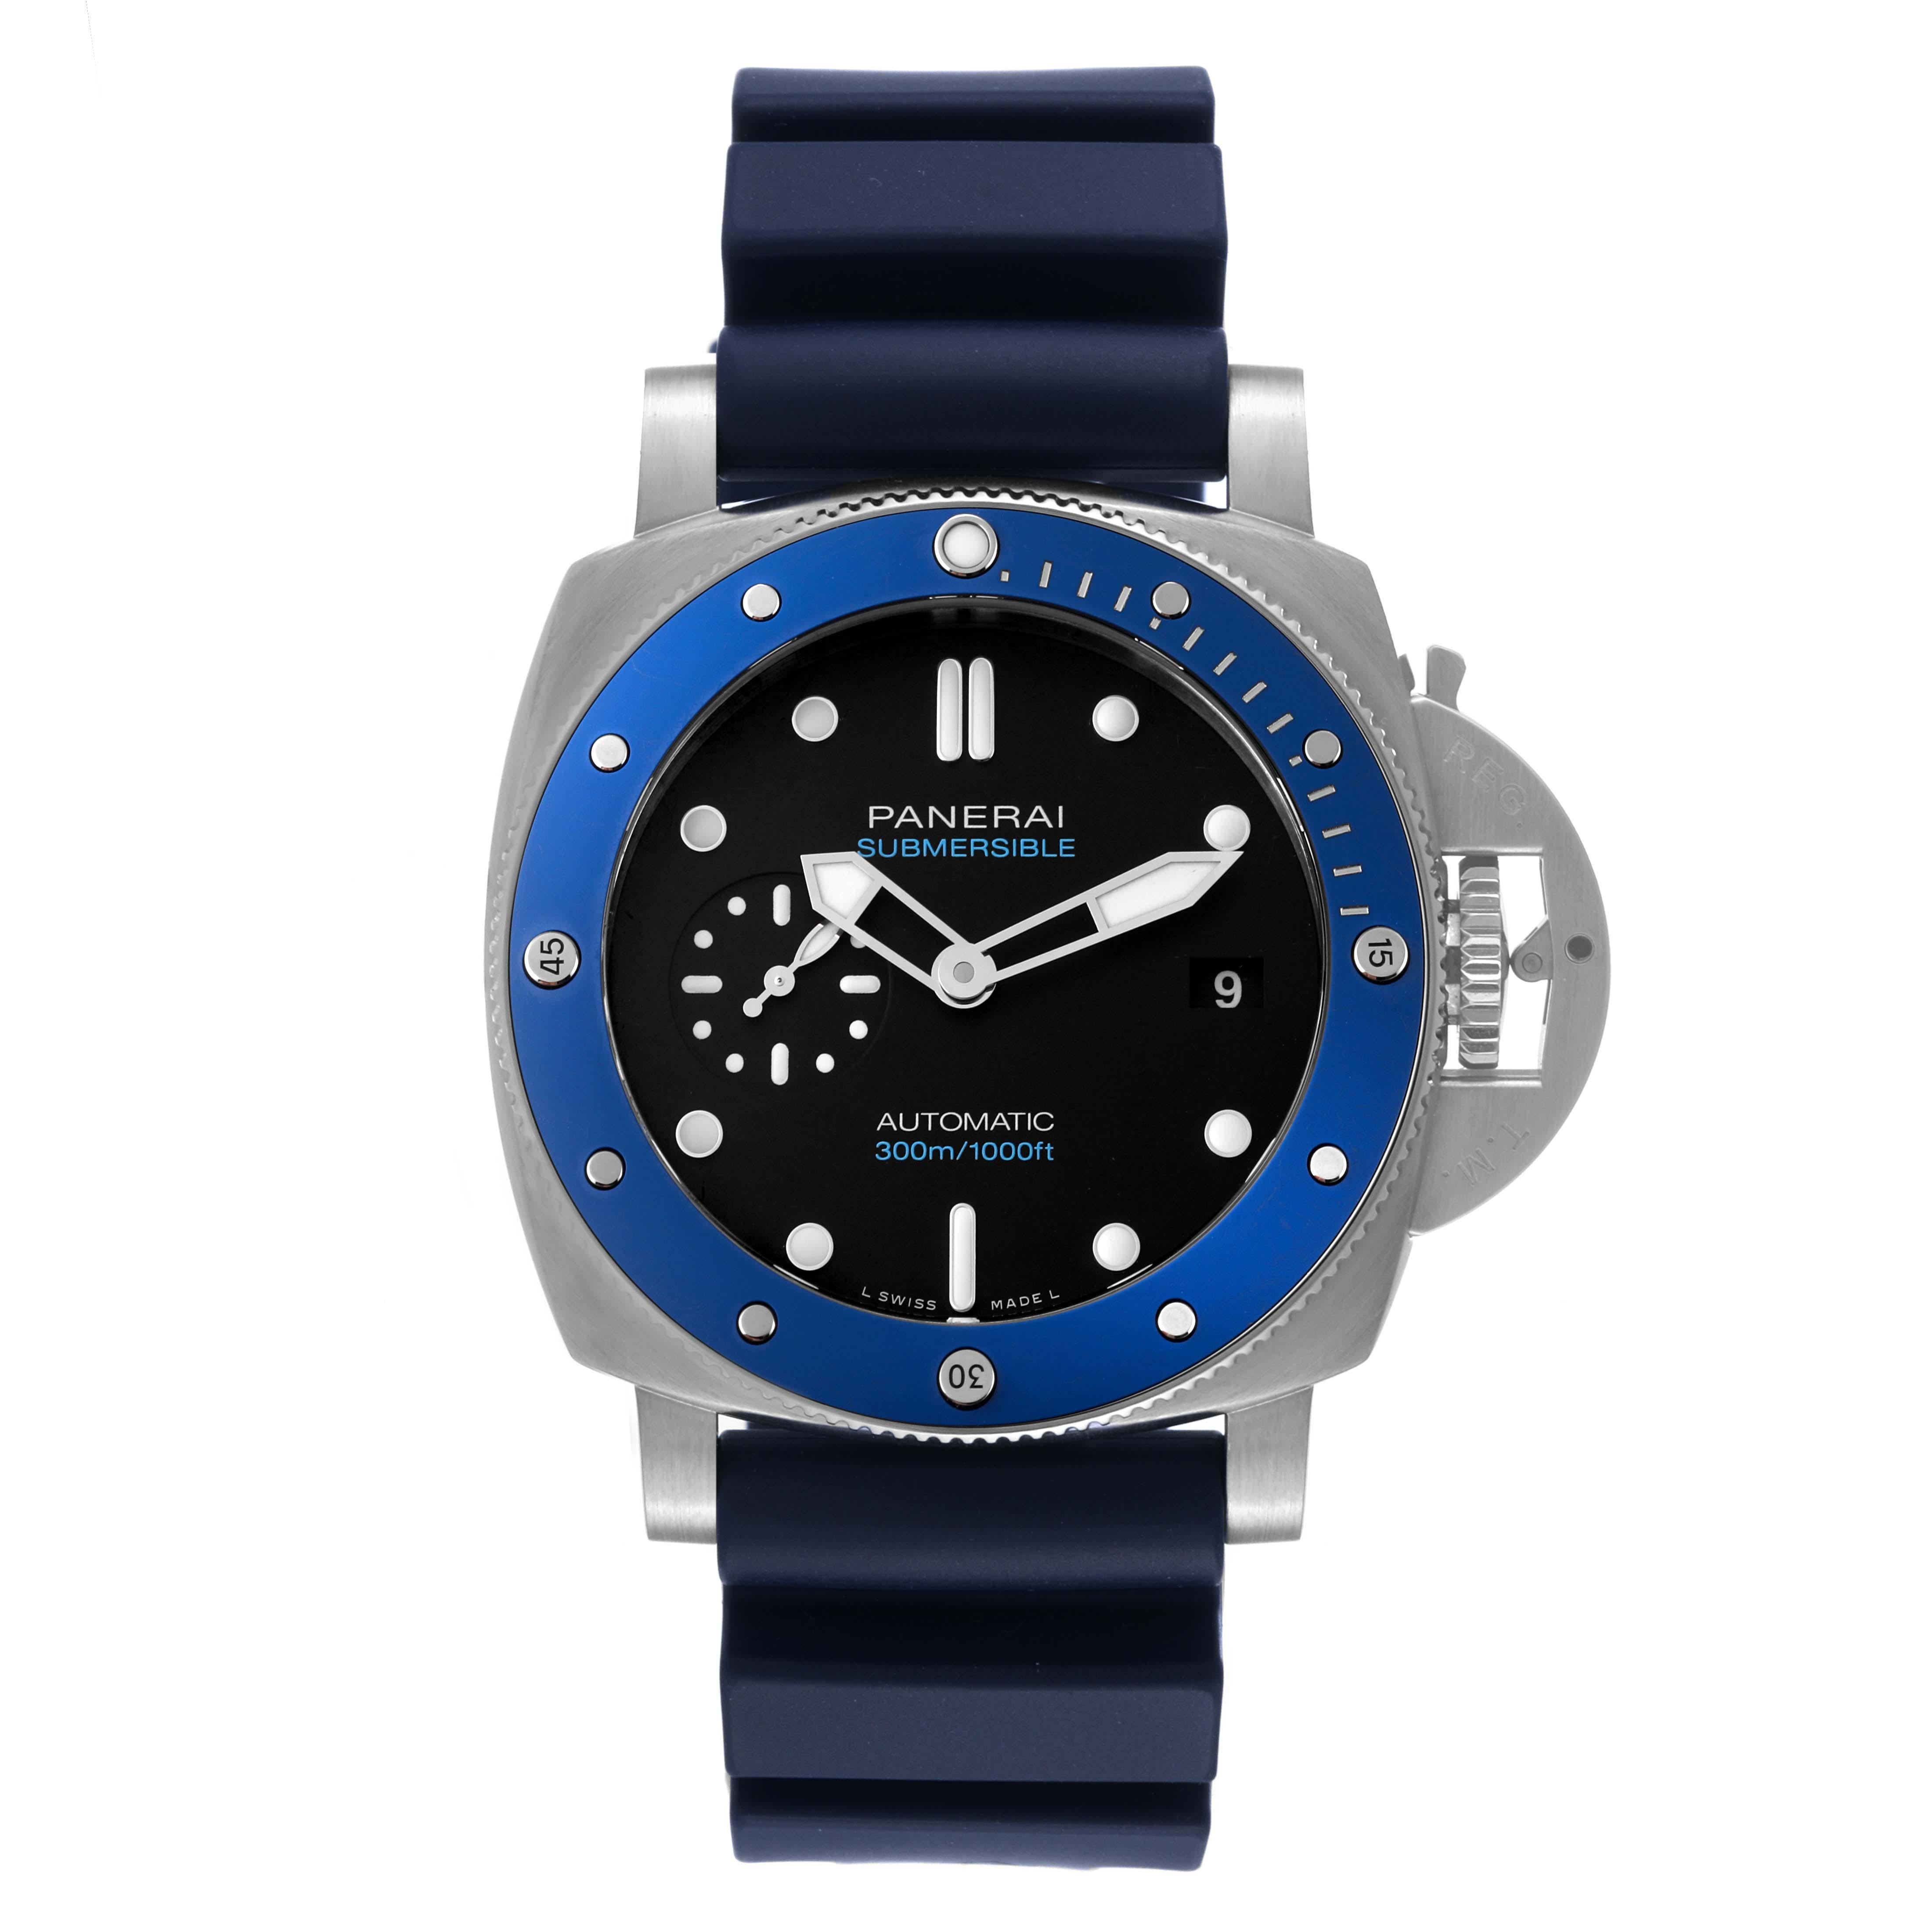 Panerai Submersible Azzurro Black Dial Steel Mens Watch PAM01209 Card. Automatic self-winding movement. Two part cushion shaped stainless steel case 42.0 mm in diameter. Panerai patented crown protector. Blue ceramic anti-clockwise unidirectional